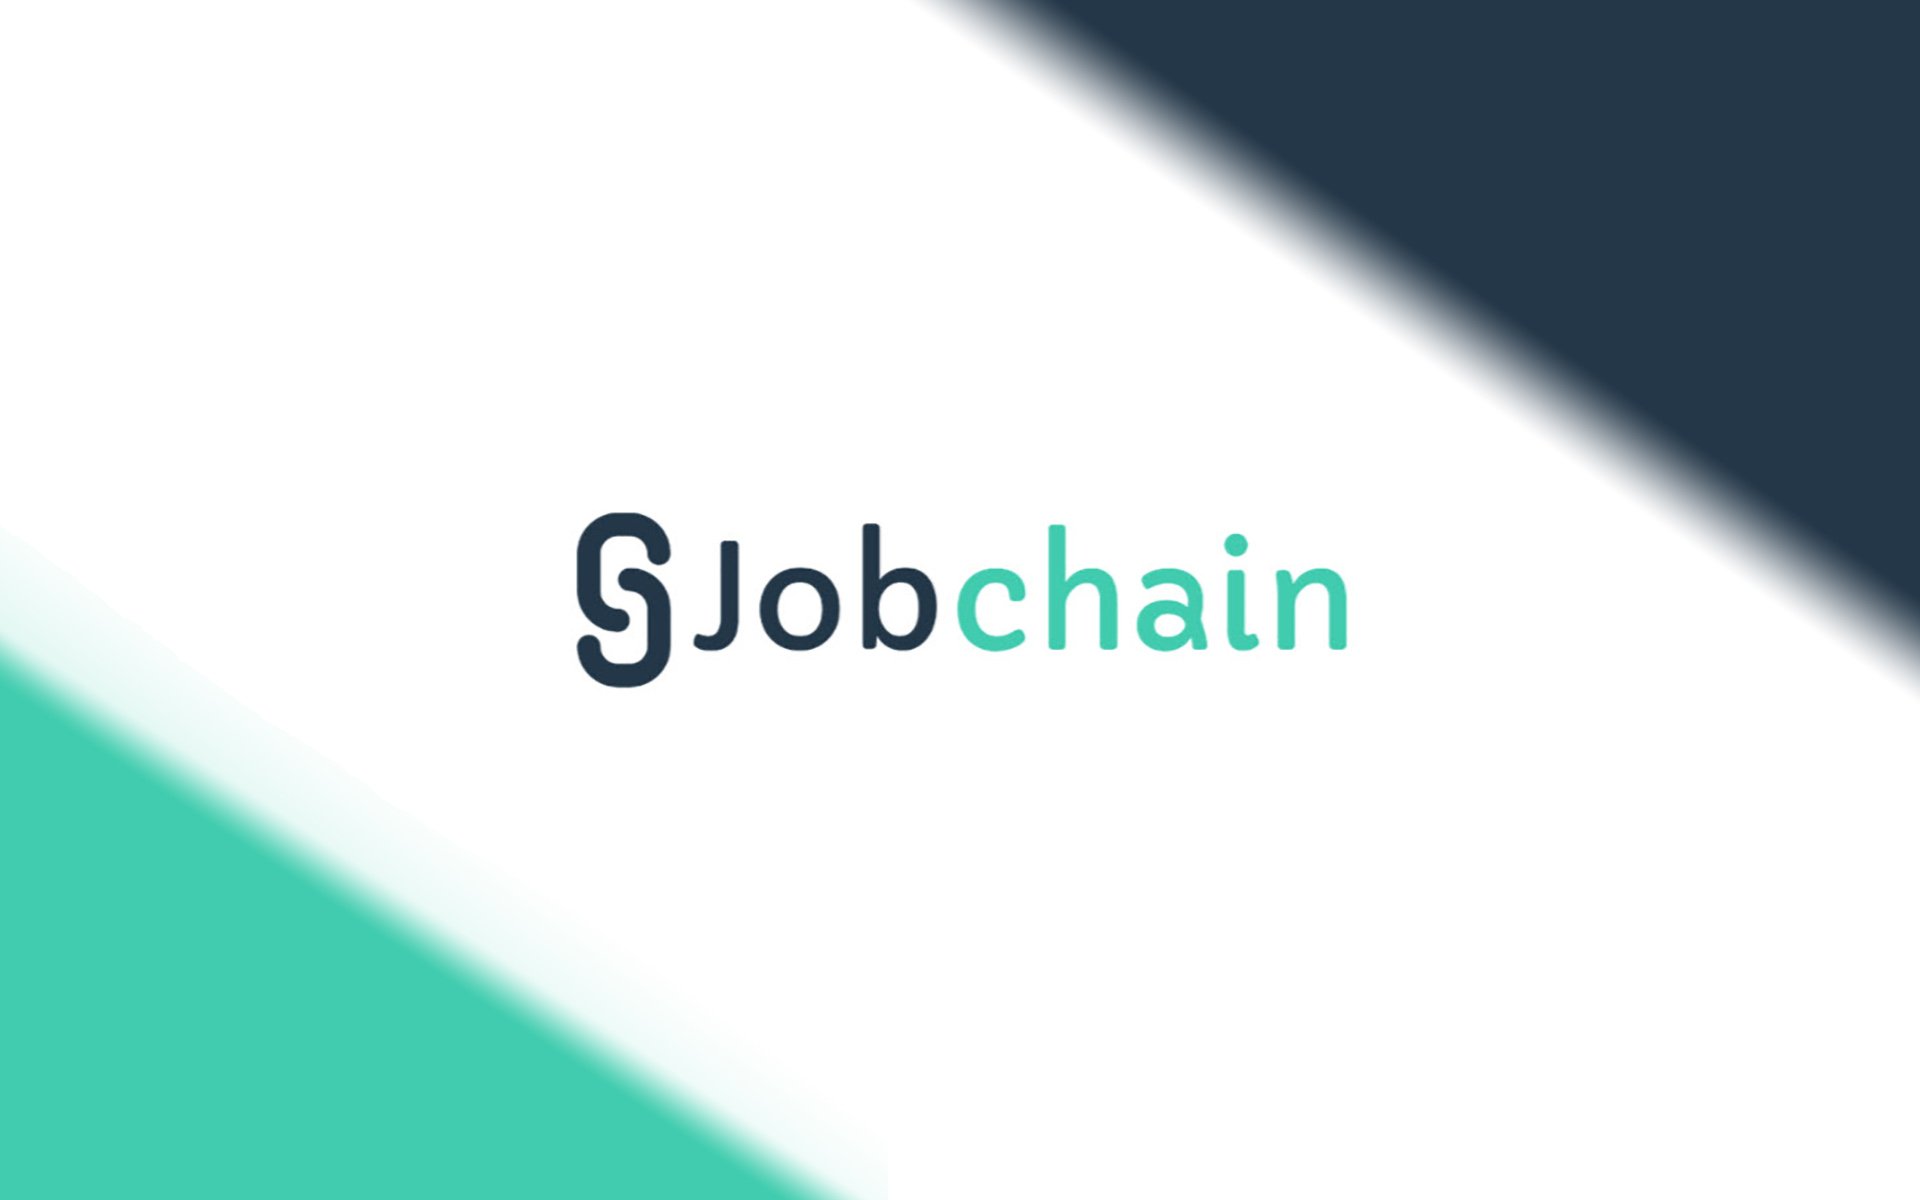 JobChain Readies For Impending ICO Pre-Sale – Adds A New Paradigm To The Global Job Market Industry